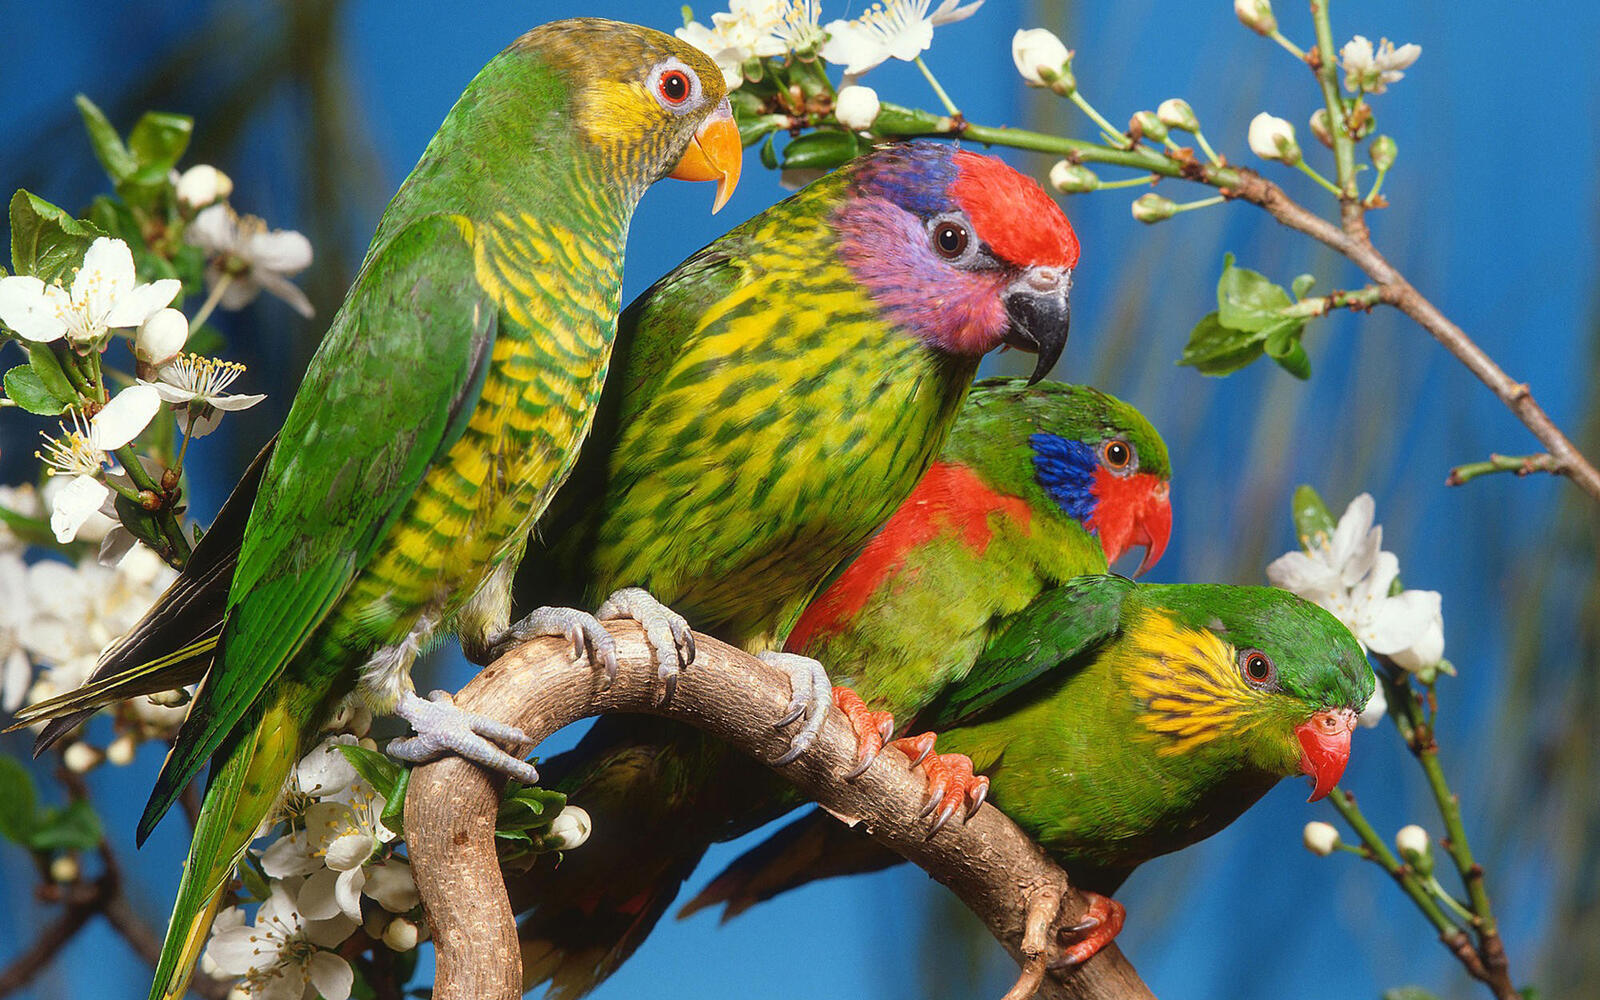 Colored parrots sitting on a branch